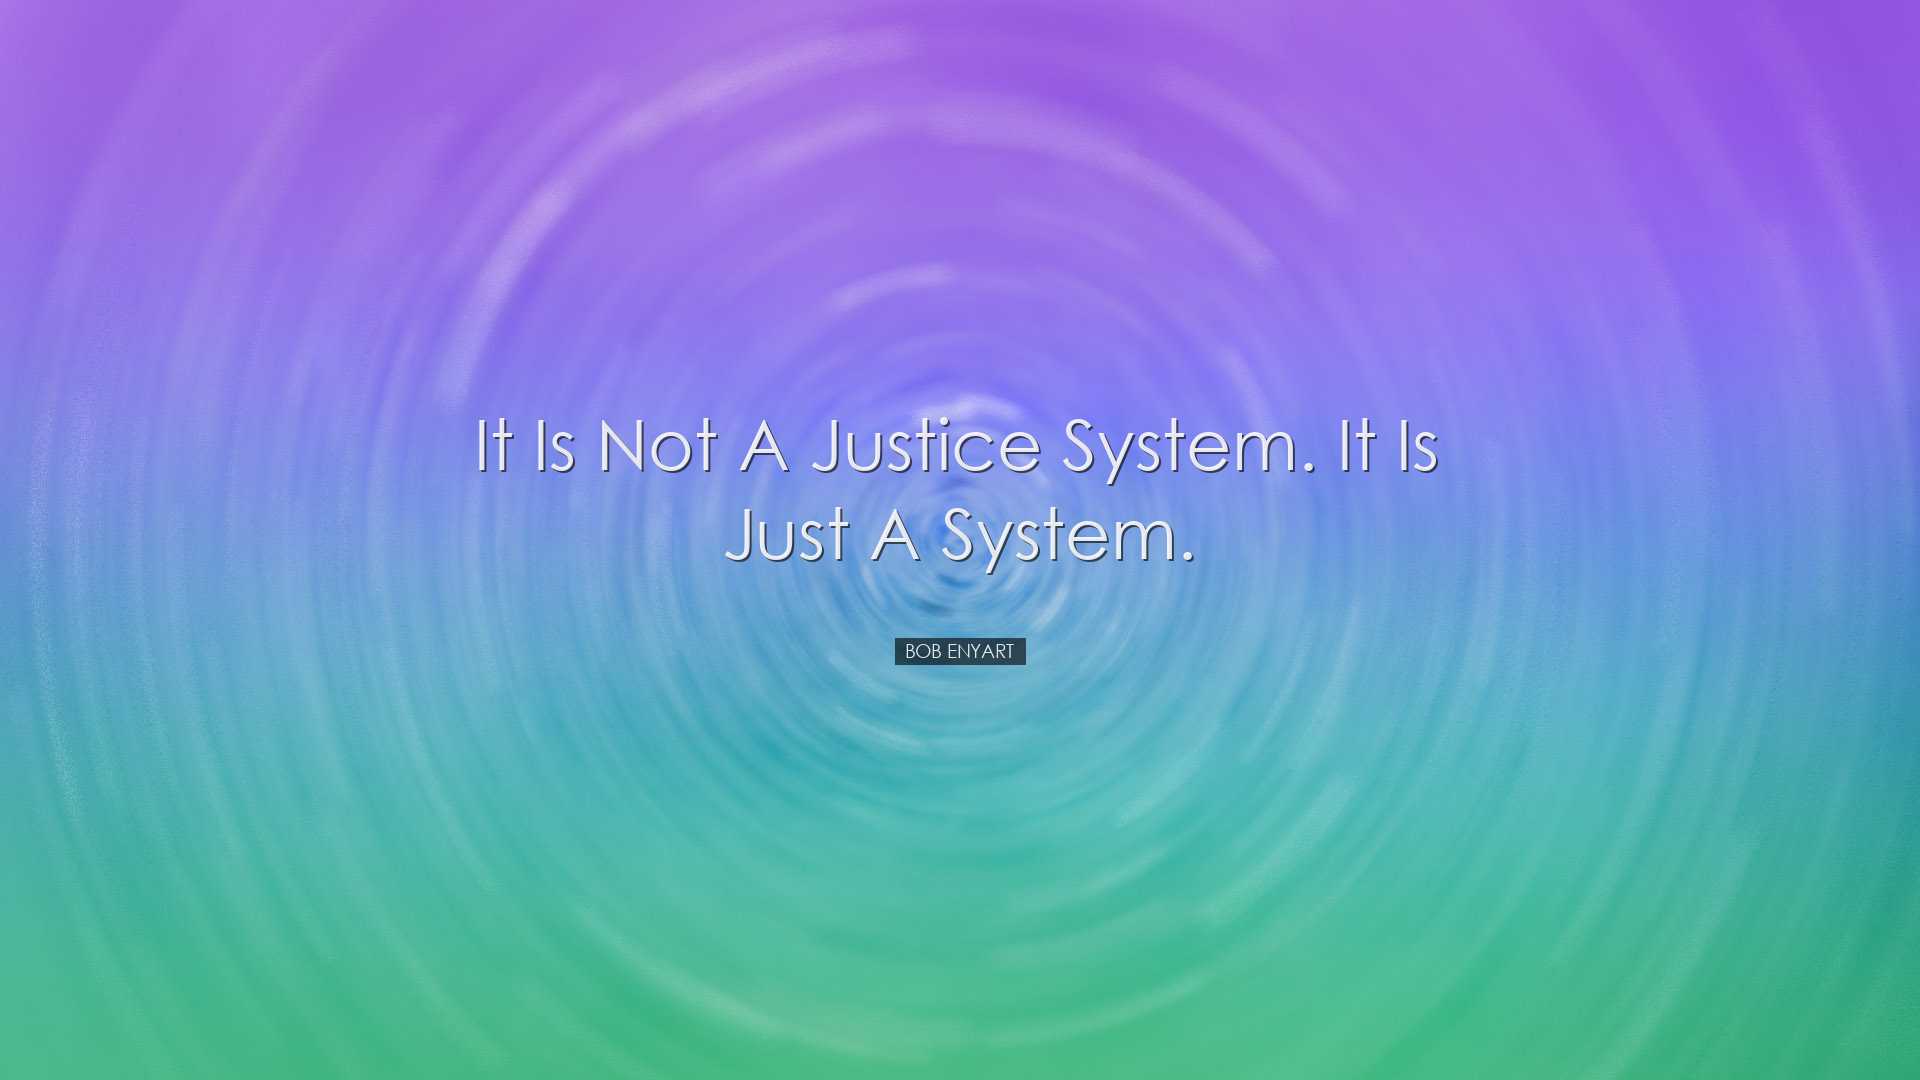 It is not a Justice System. It is just a system. - Bob Enyart